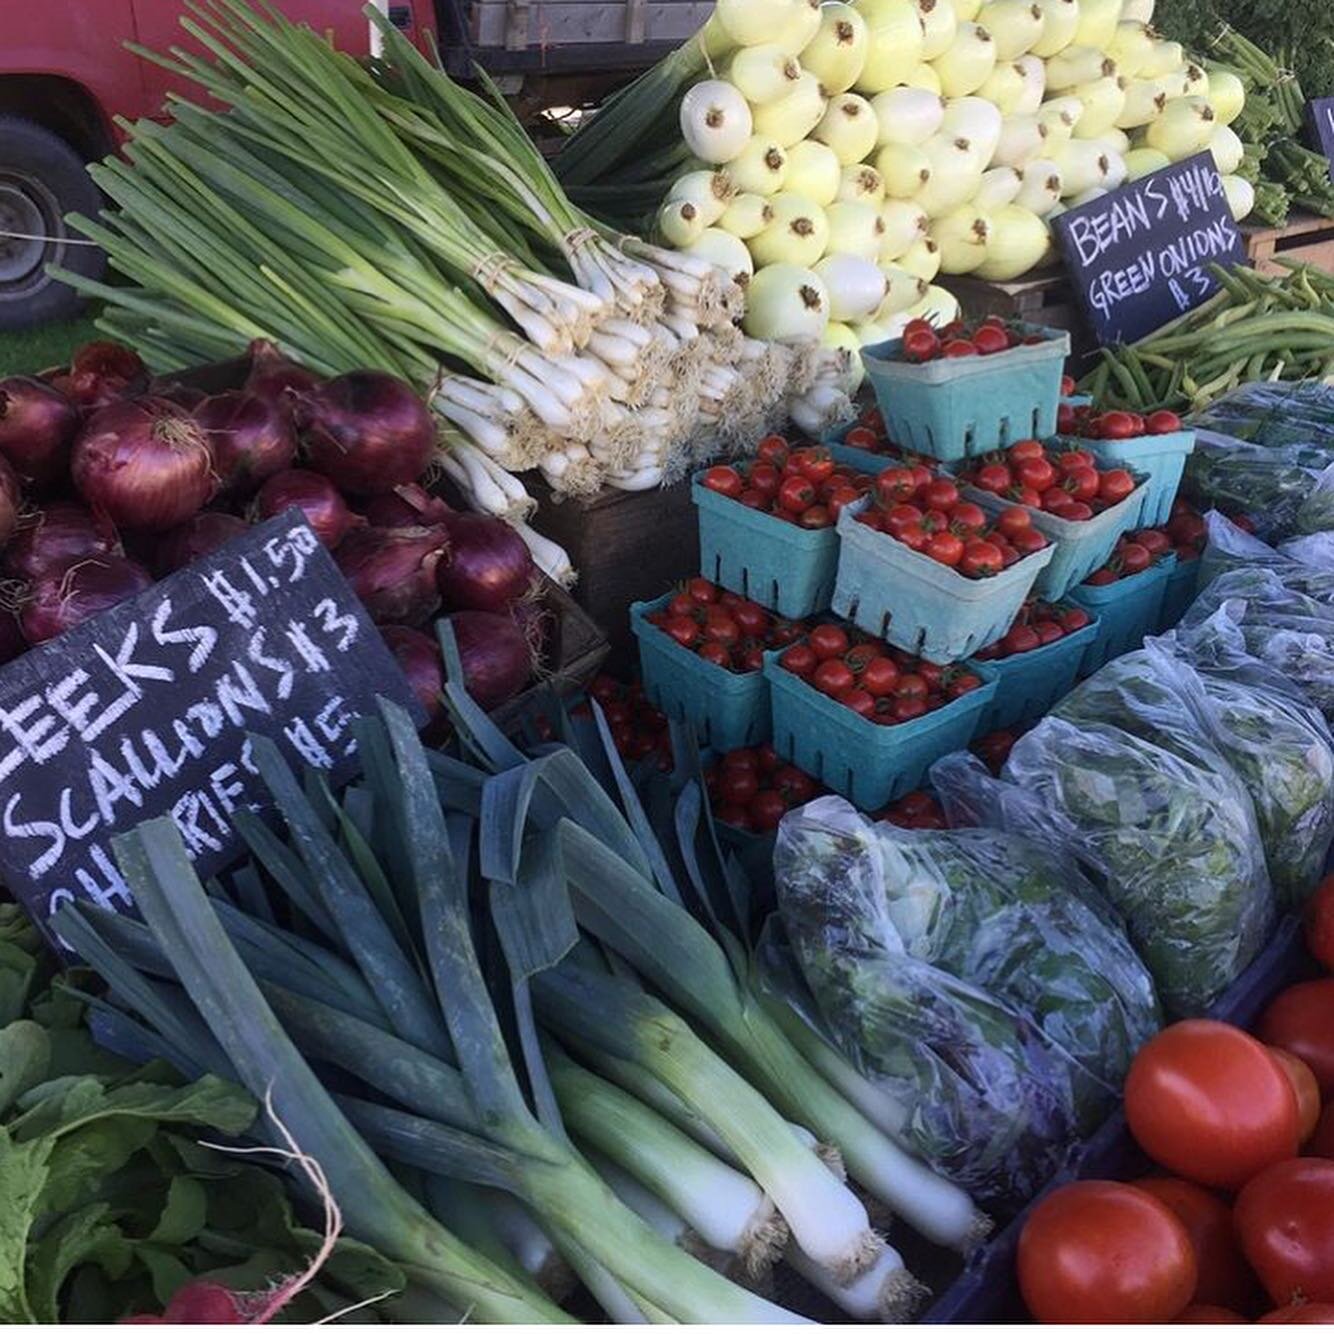 Join us TOMORROW 9-1 for our very last market of 2020! It&rsquo;s hard to believe that 22 weeks have gone by and that another season is under our belts. It hasn&rsquo;t been an easy one to pull off, but we so appreciate our customers shopping with us